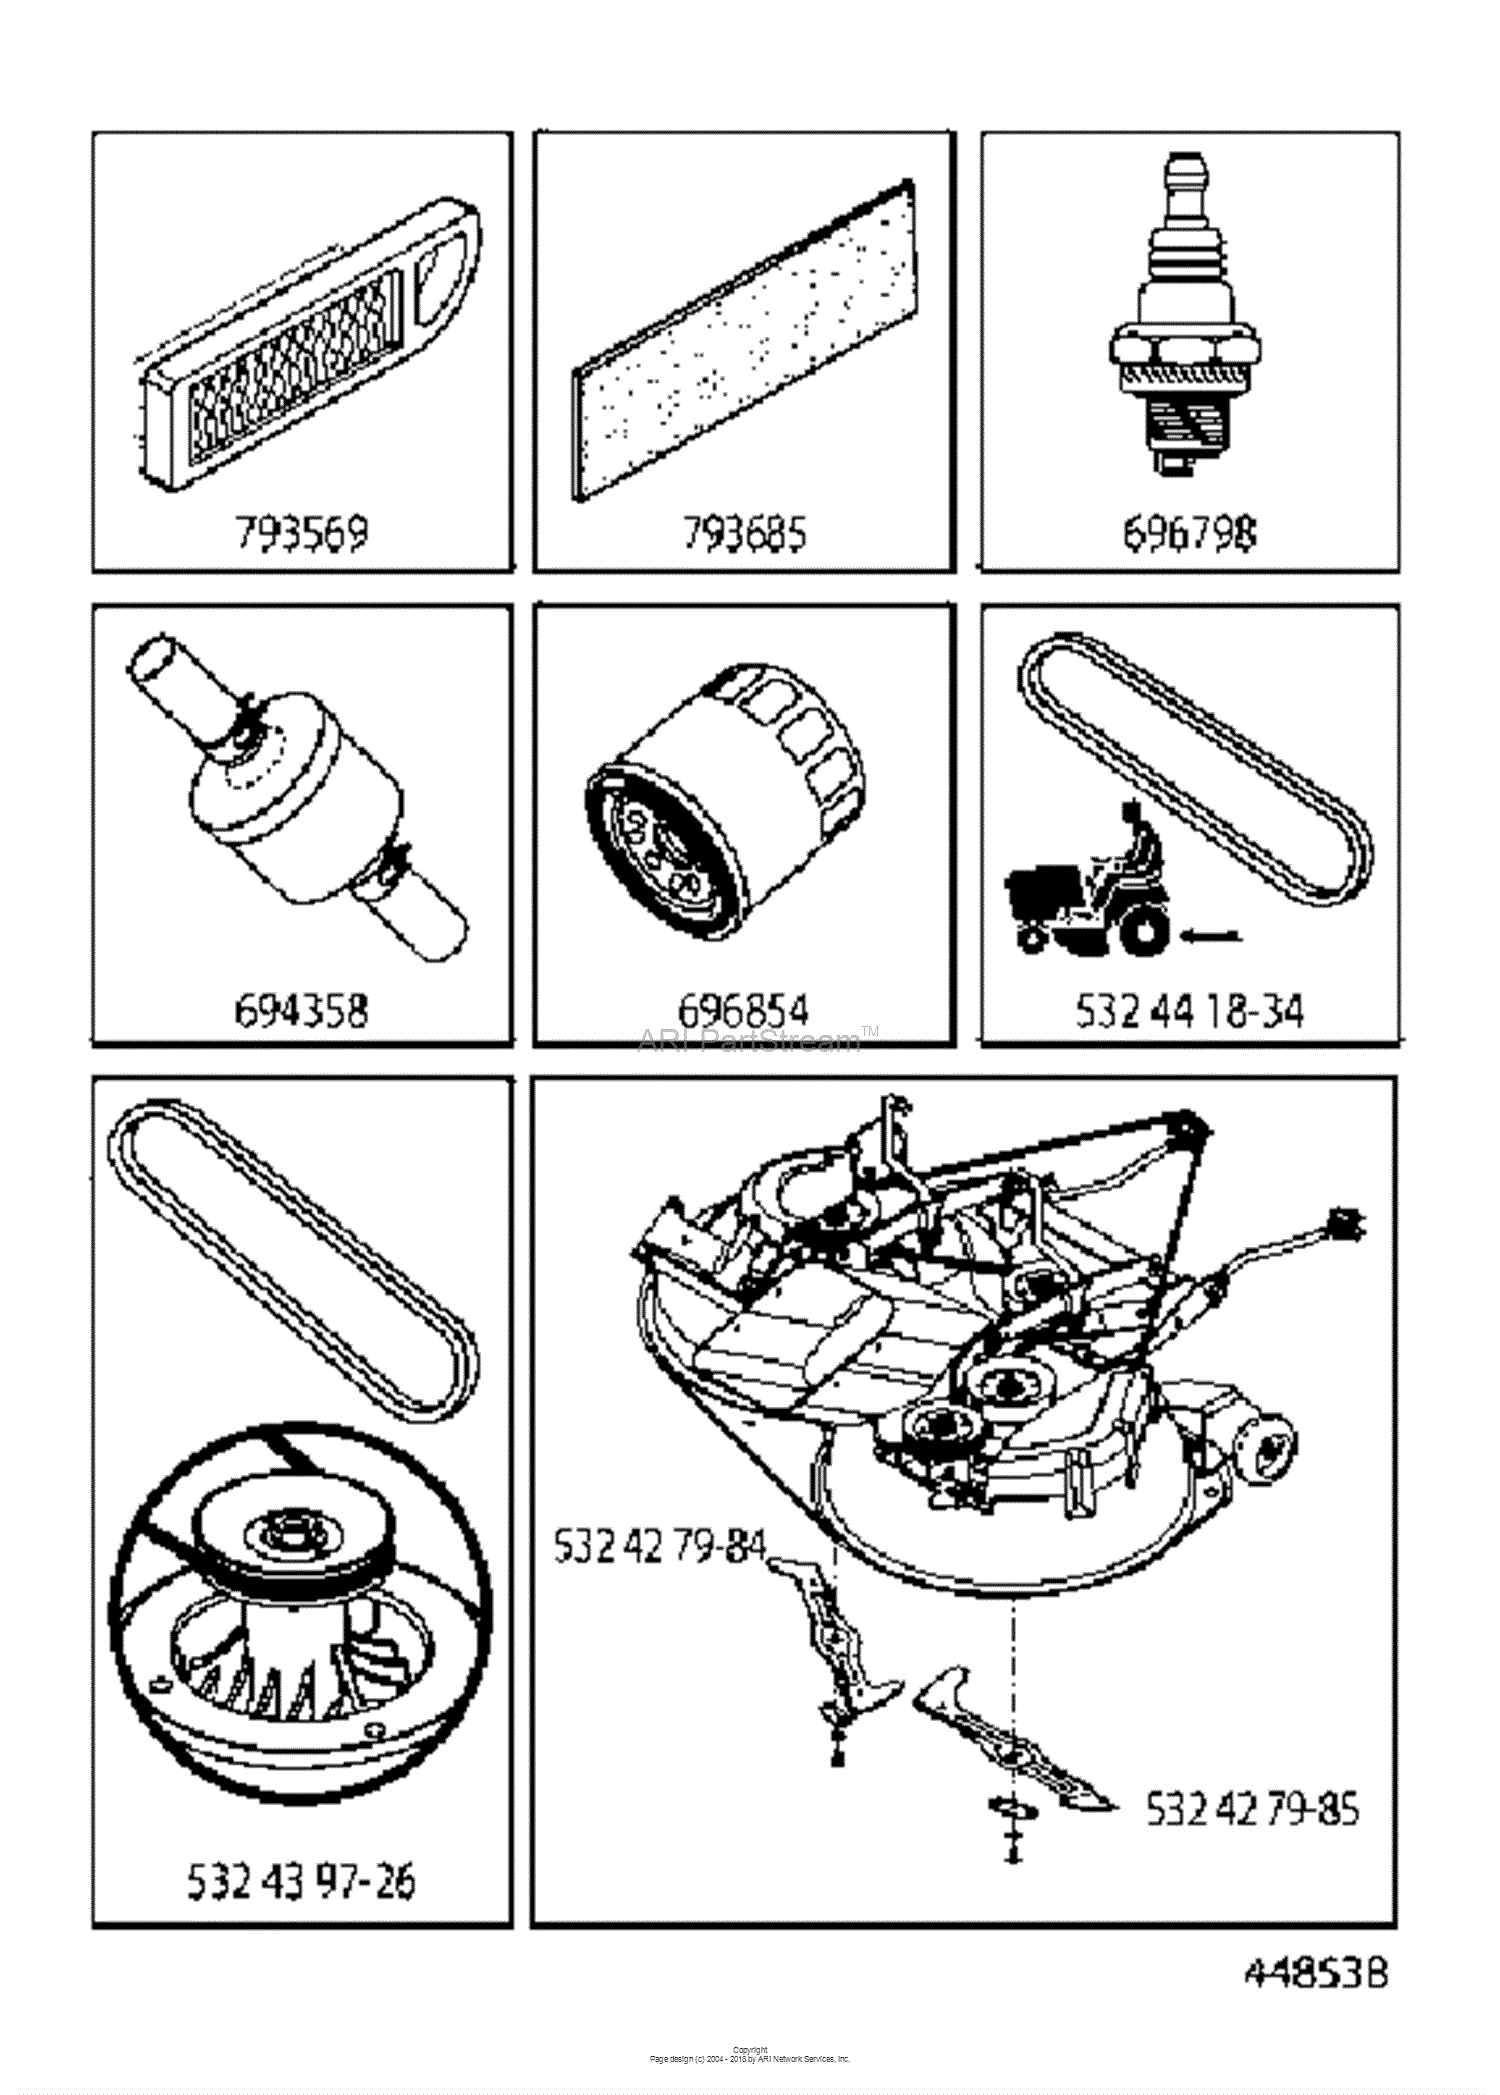 Husqvarna CTH2138R - 96051005600 (2012-02) Parts Diagram for FREQUENTLY